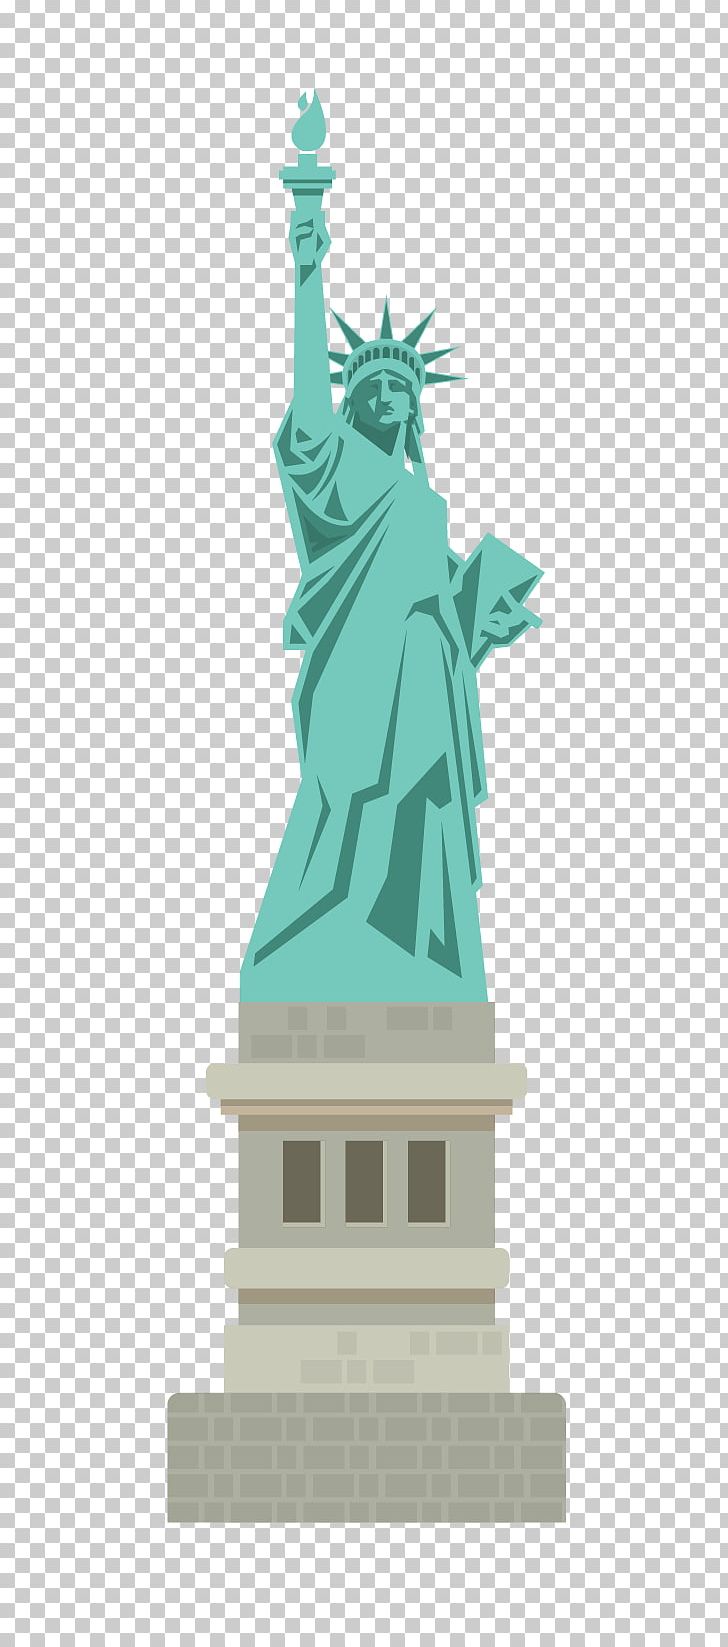 Statue Of Liberty Subscriber Identity Module Prepay Mobile Phone LTE 4G PNG, Clipart, Att Gophone, Att Mobility, Buddha Statue, Building, Internet Free PNG Download